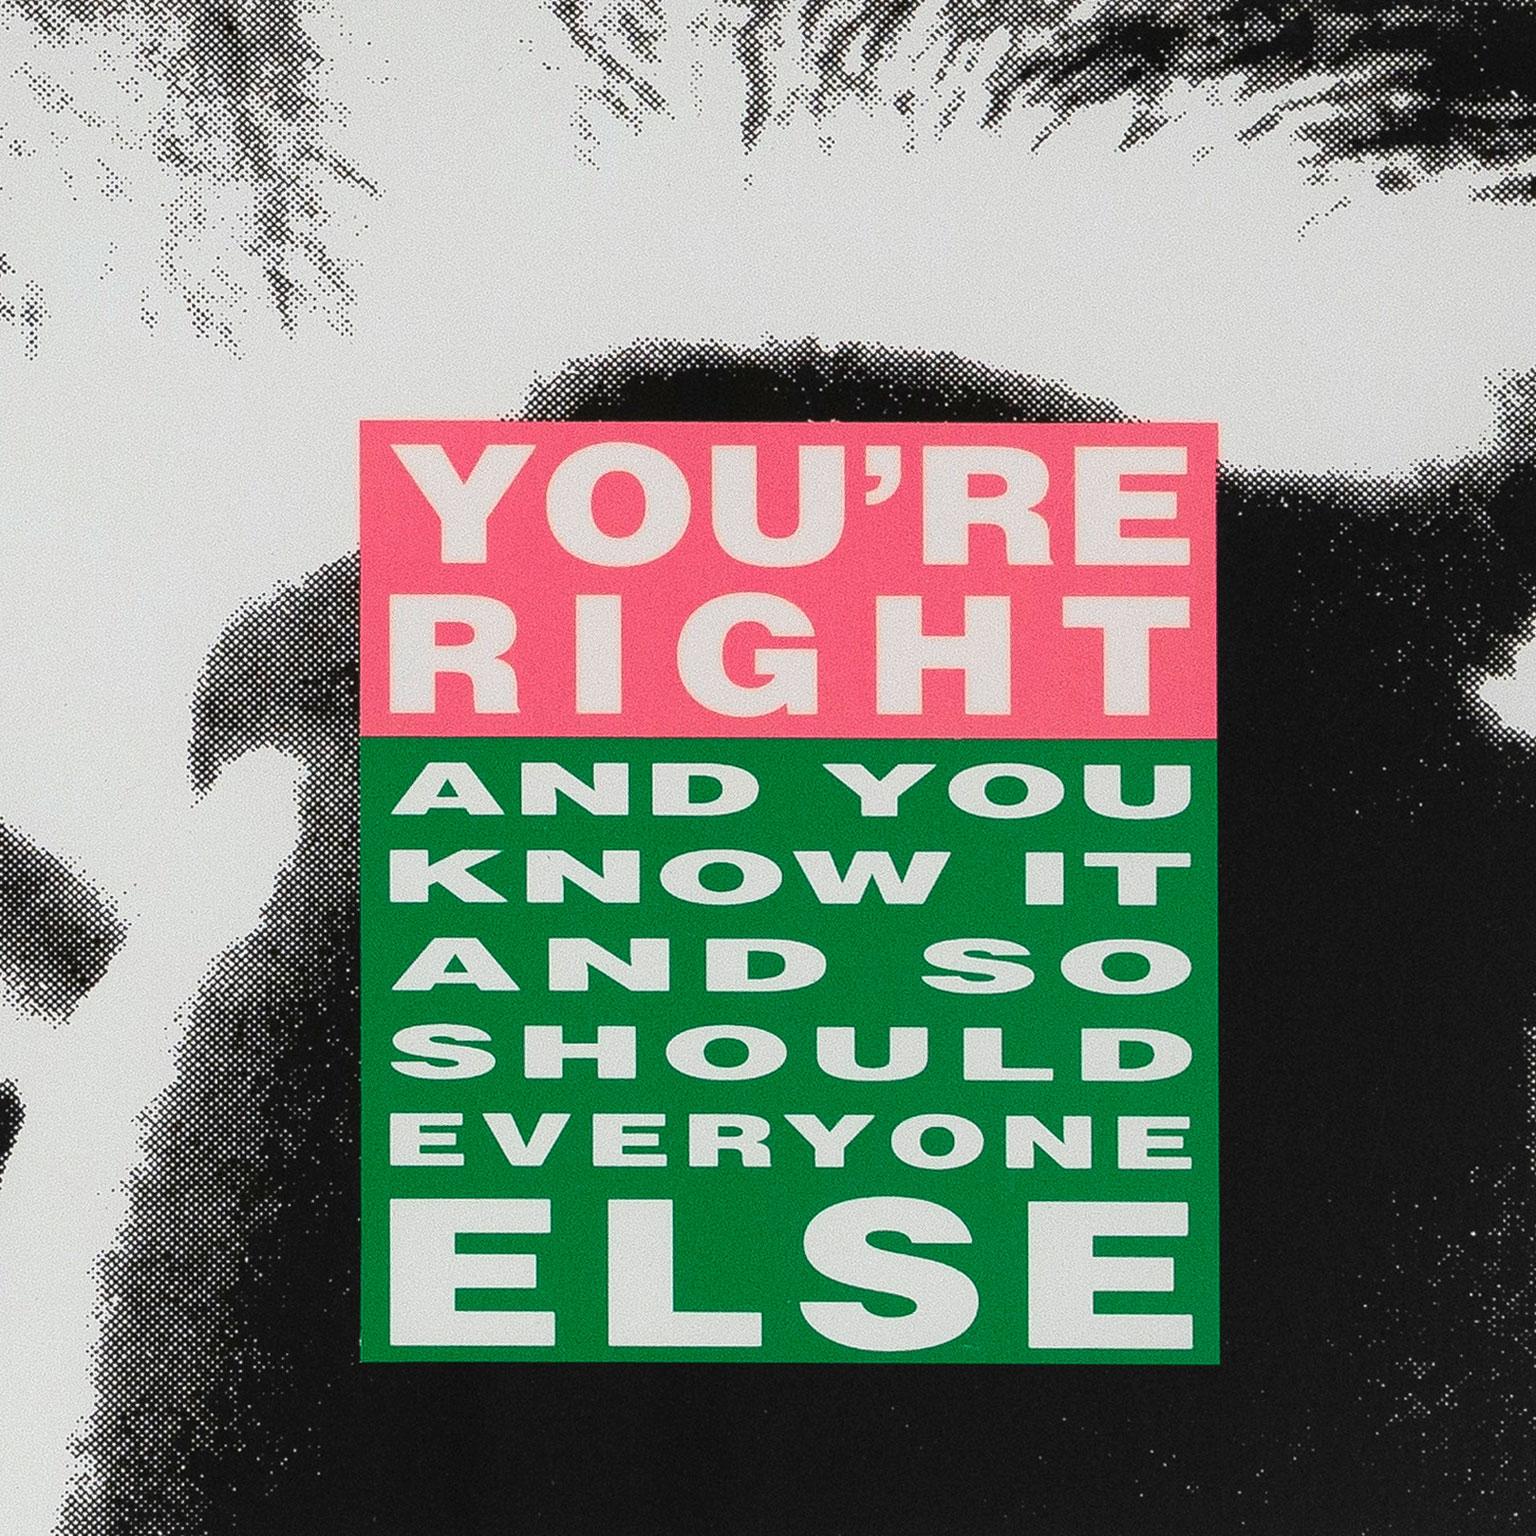 barbara kruger’s signature style combines black-and-white photographic images with